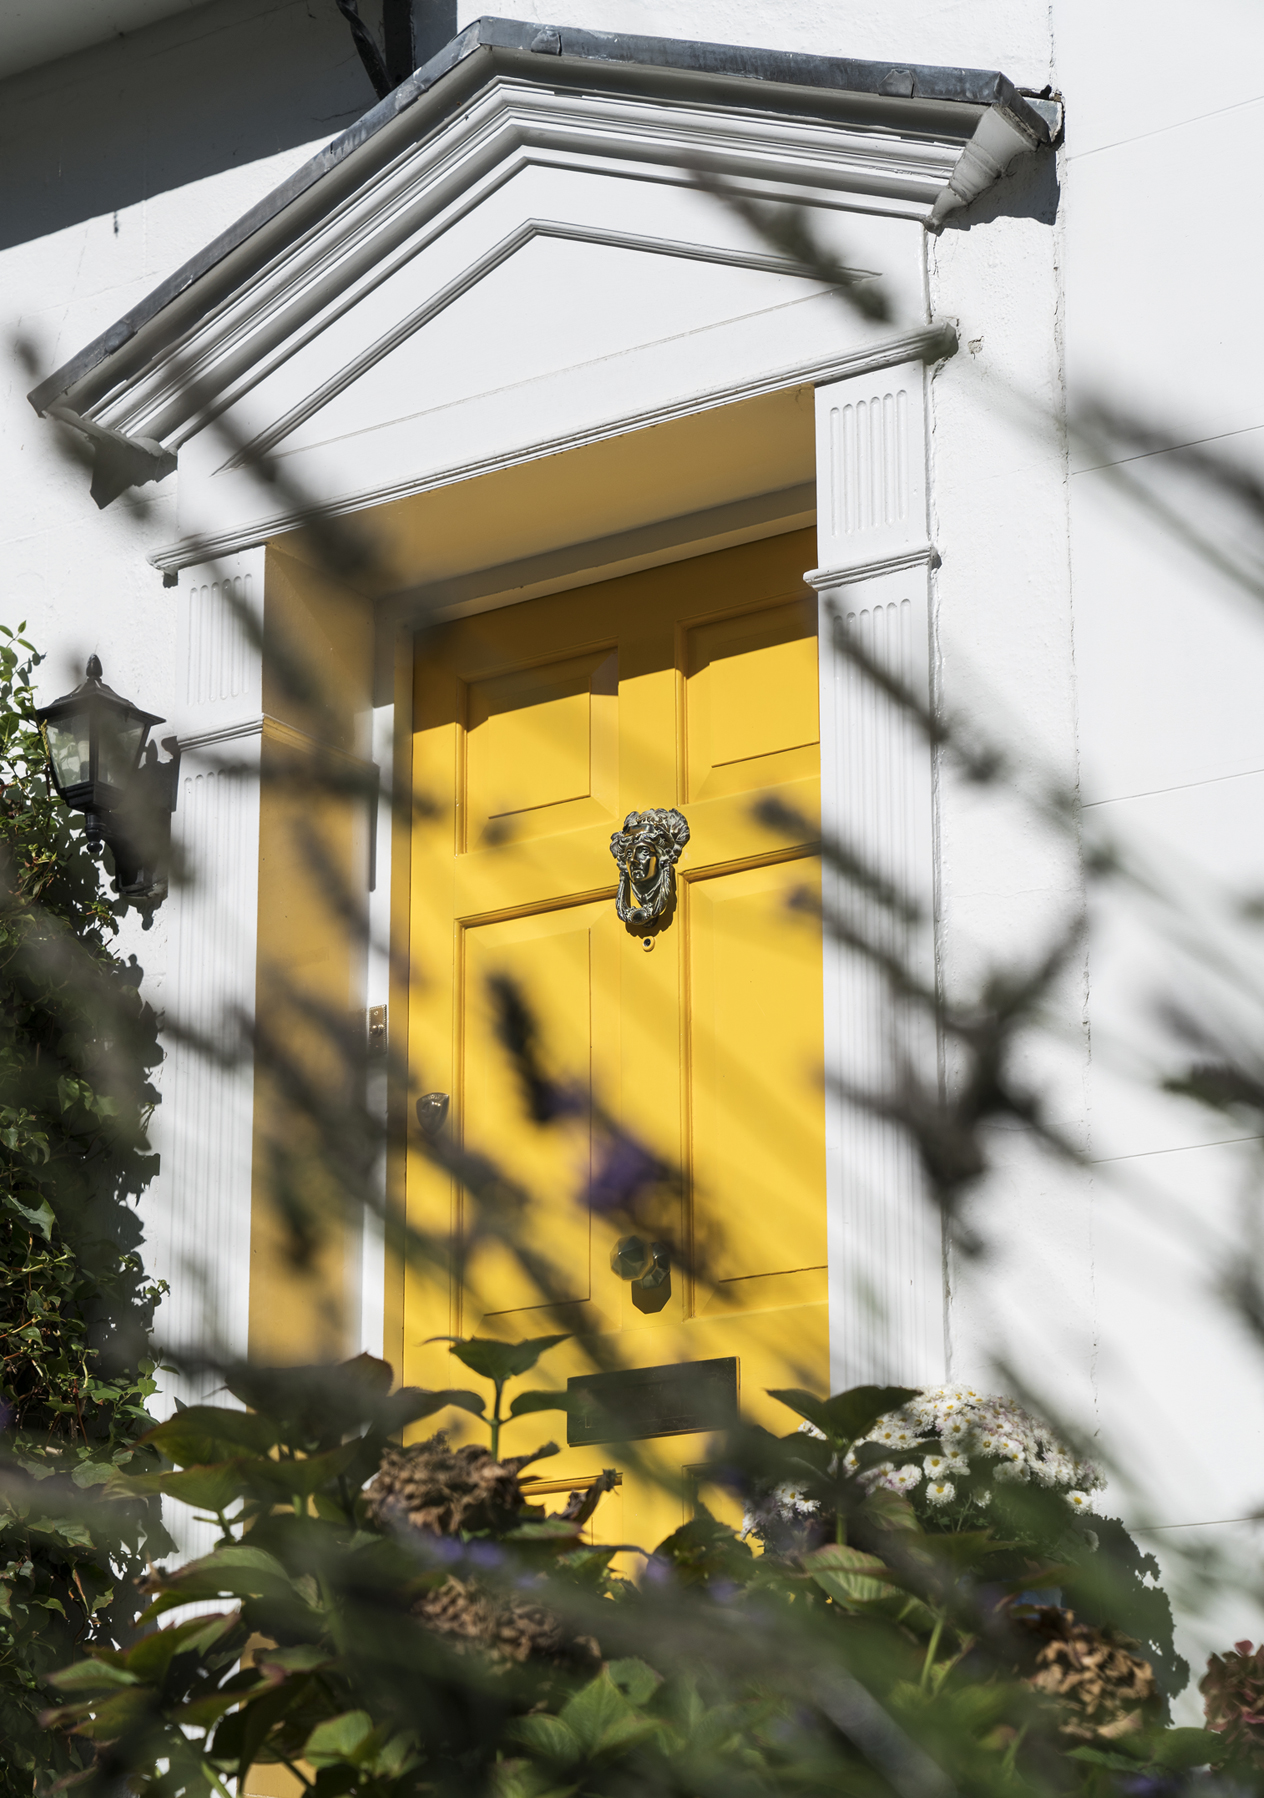 A stately yellow front door with a greco-roman inspired surround.